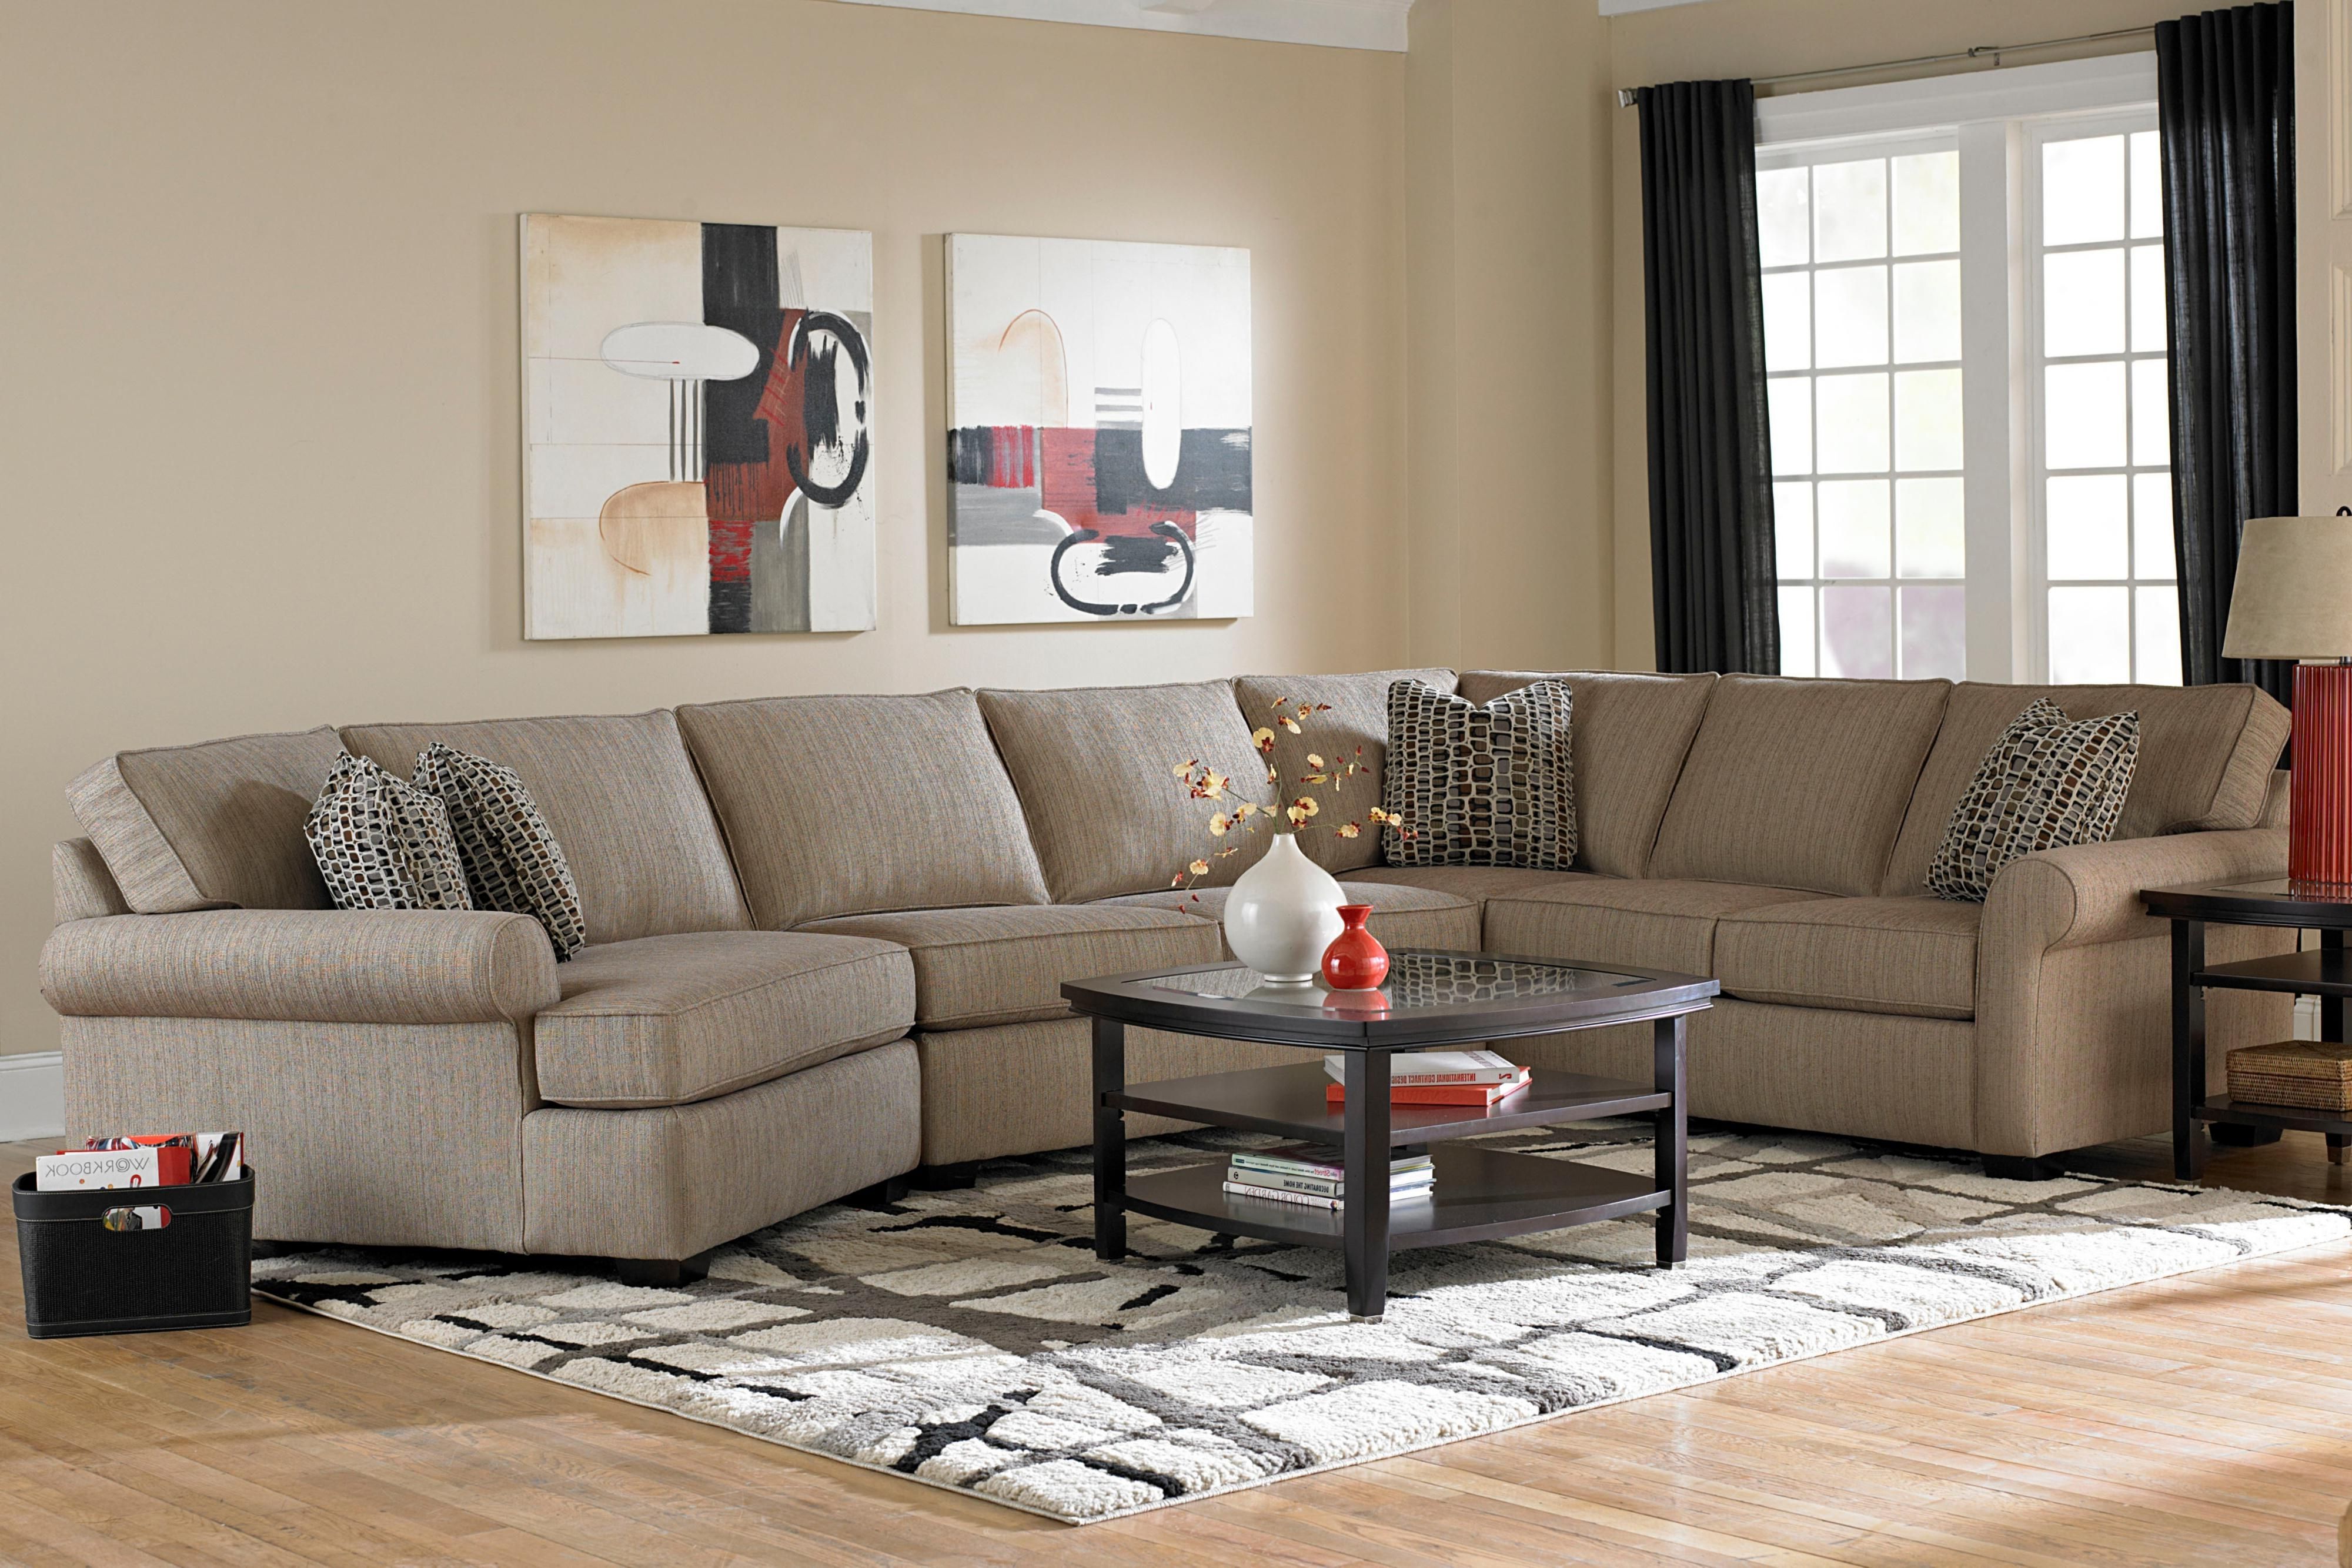 Newest Broyhill Furniture Ethan Transitional Sectional Sofa With Right With Regard To Wichita Ks Sectional Sofas (View 7 of 20)